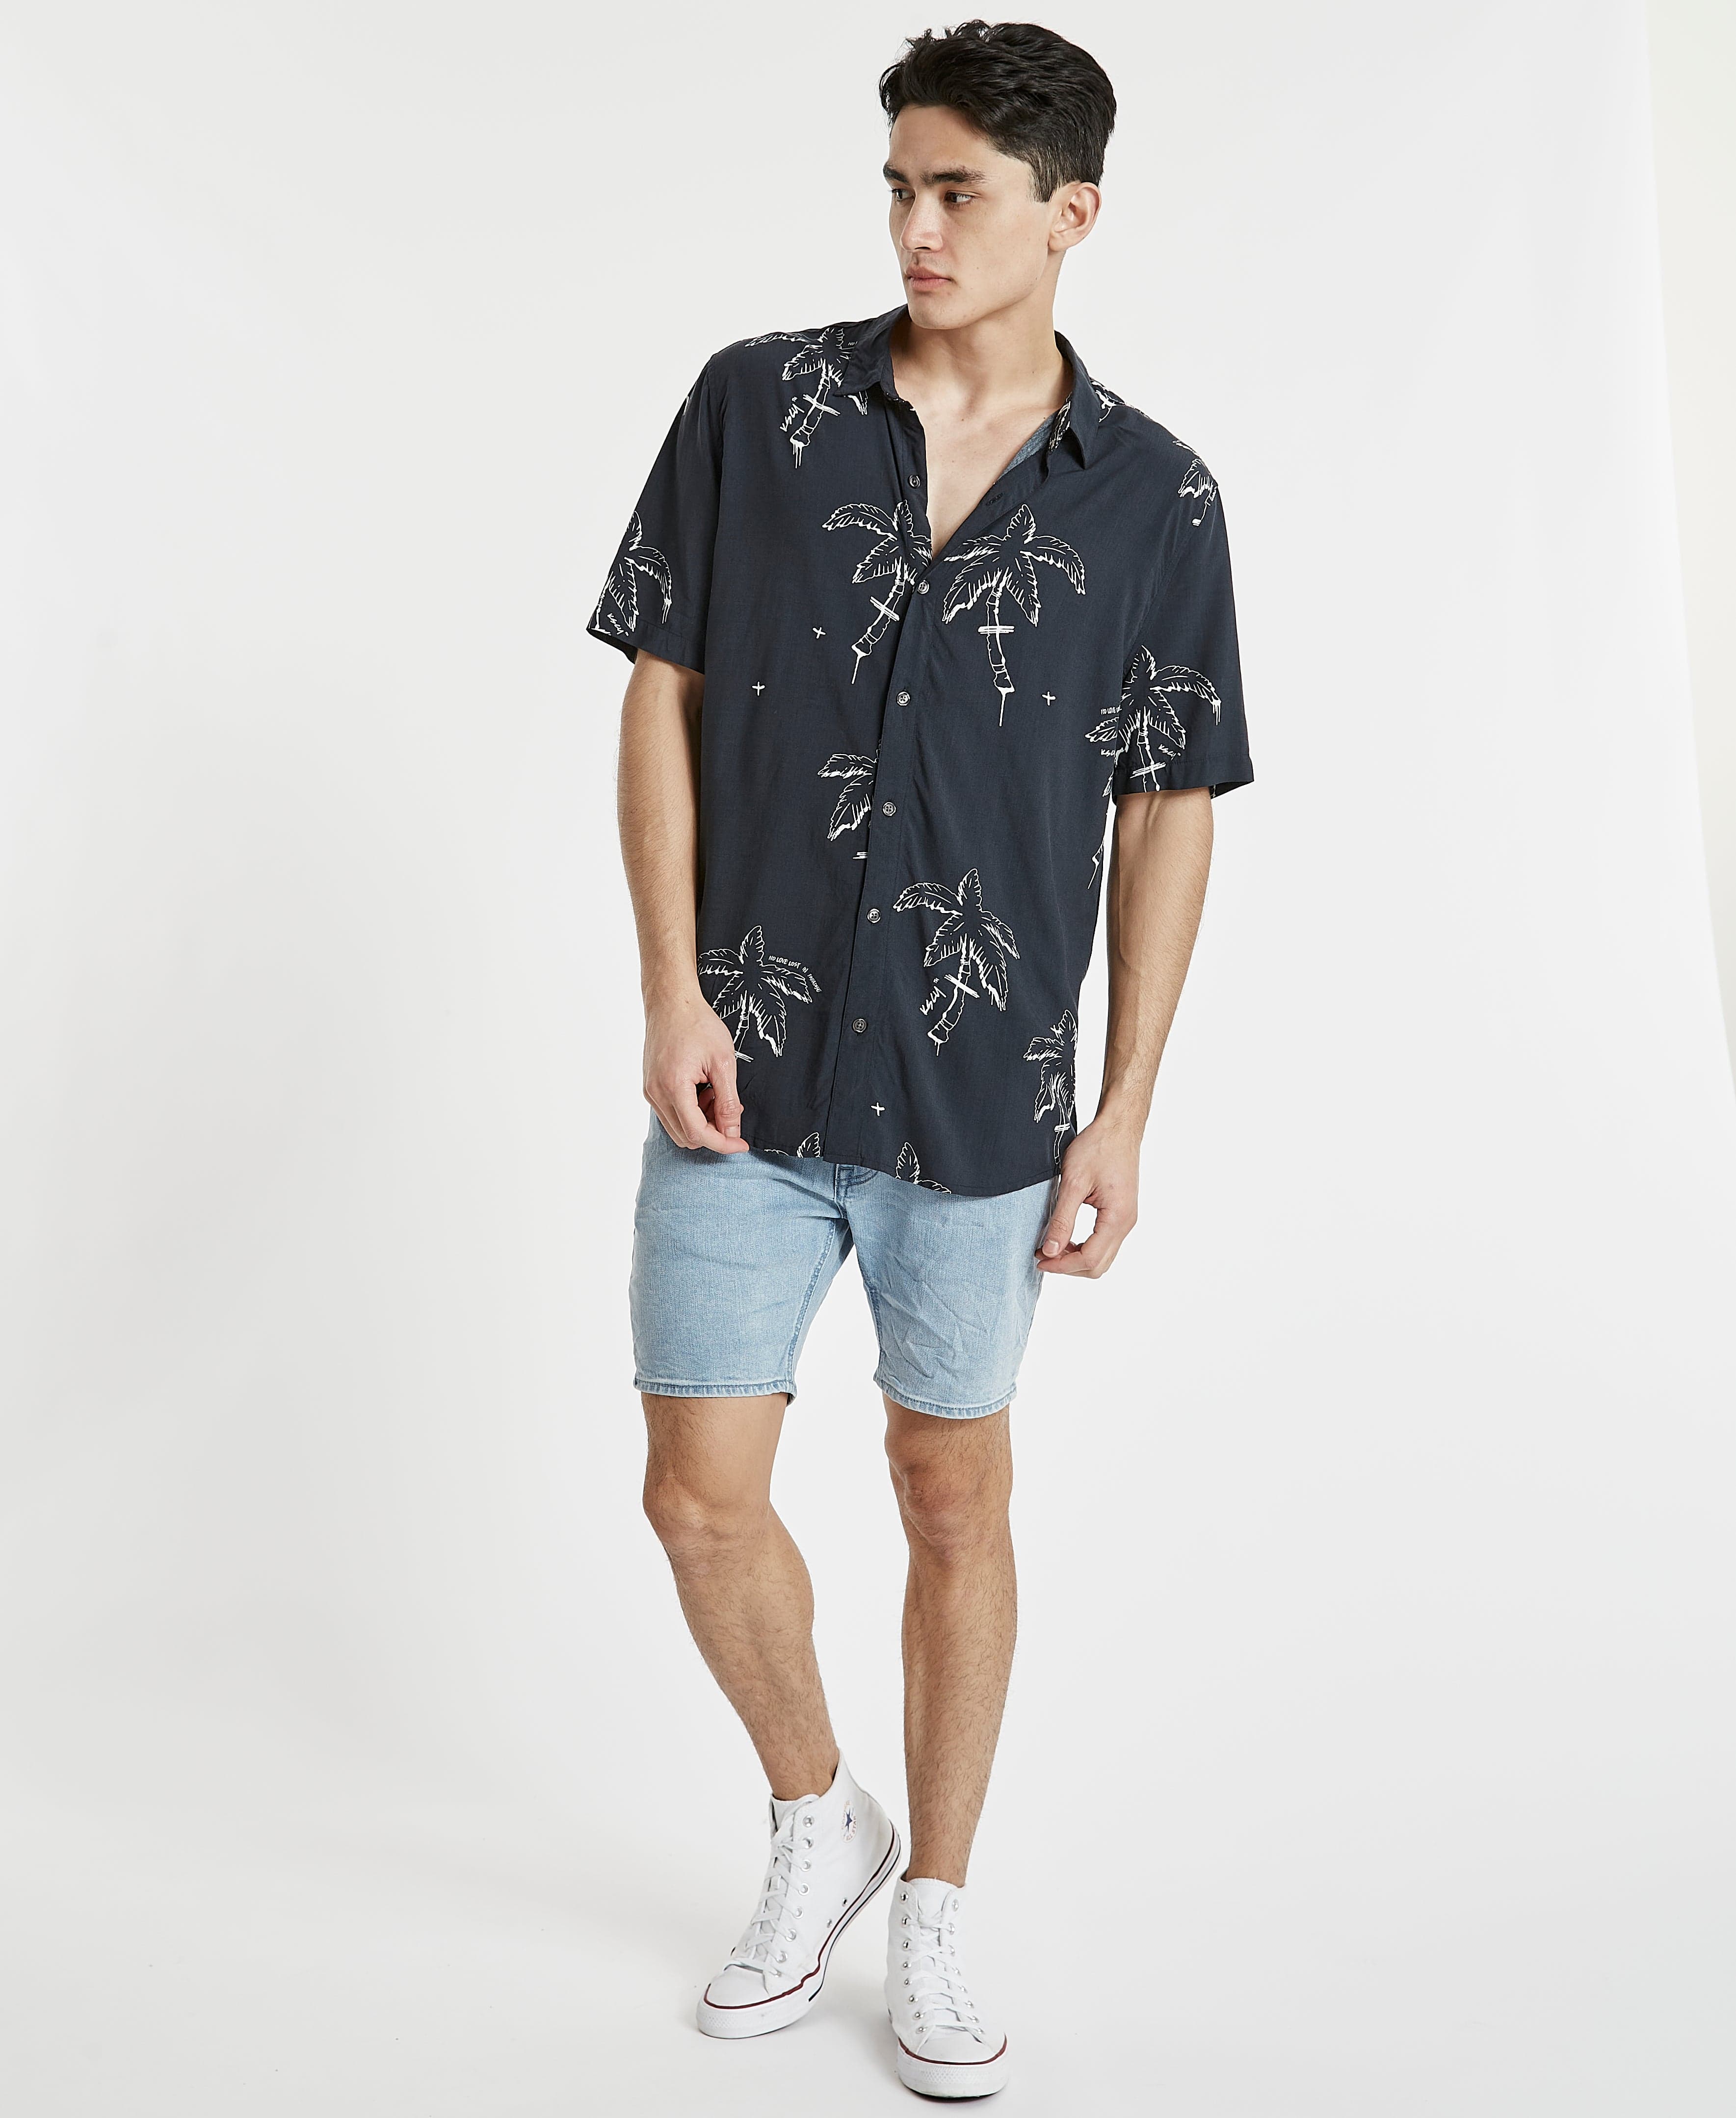 Become Relaxed S/S Shirt Black/White Print